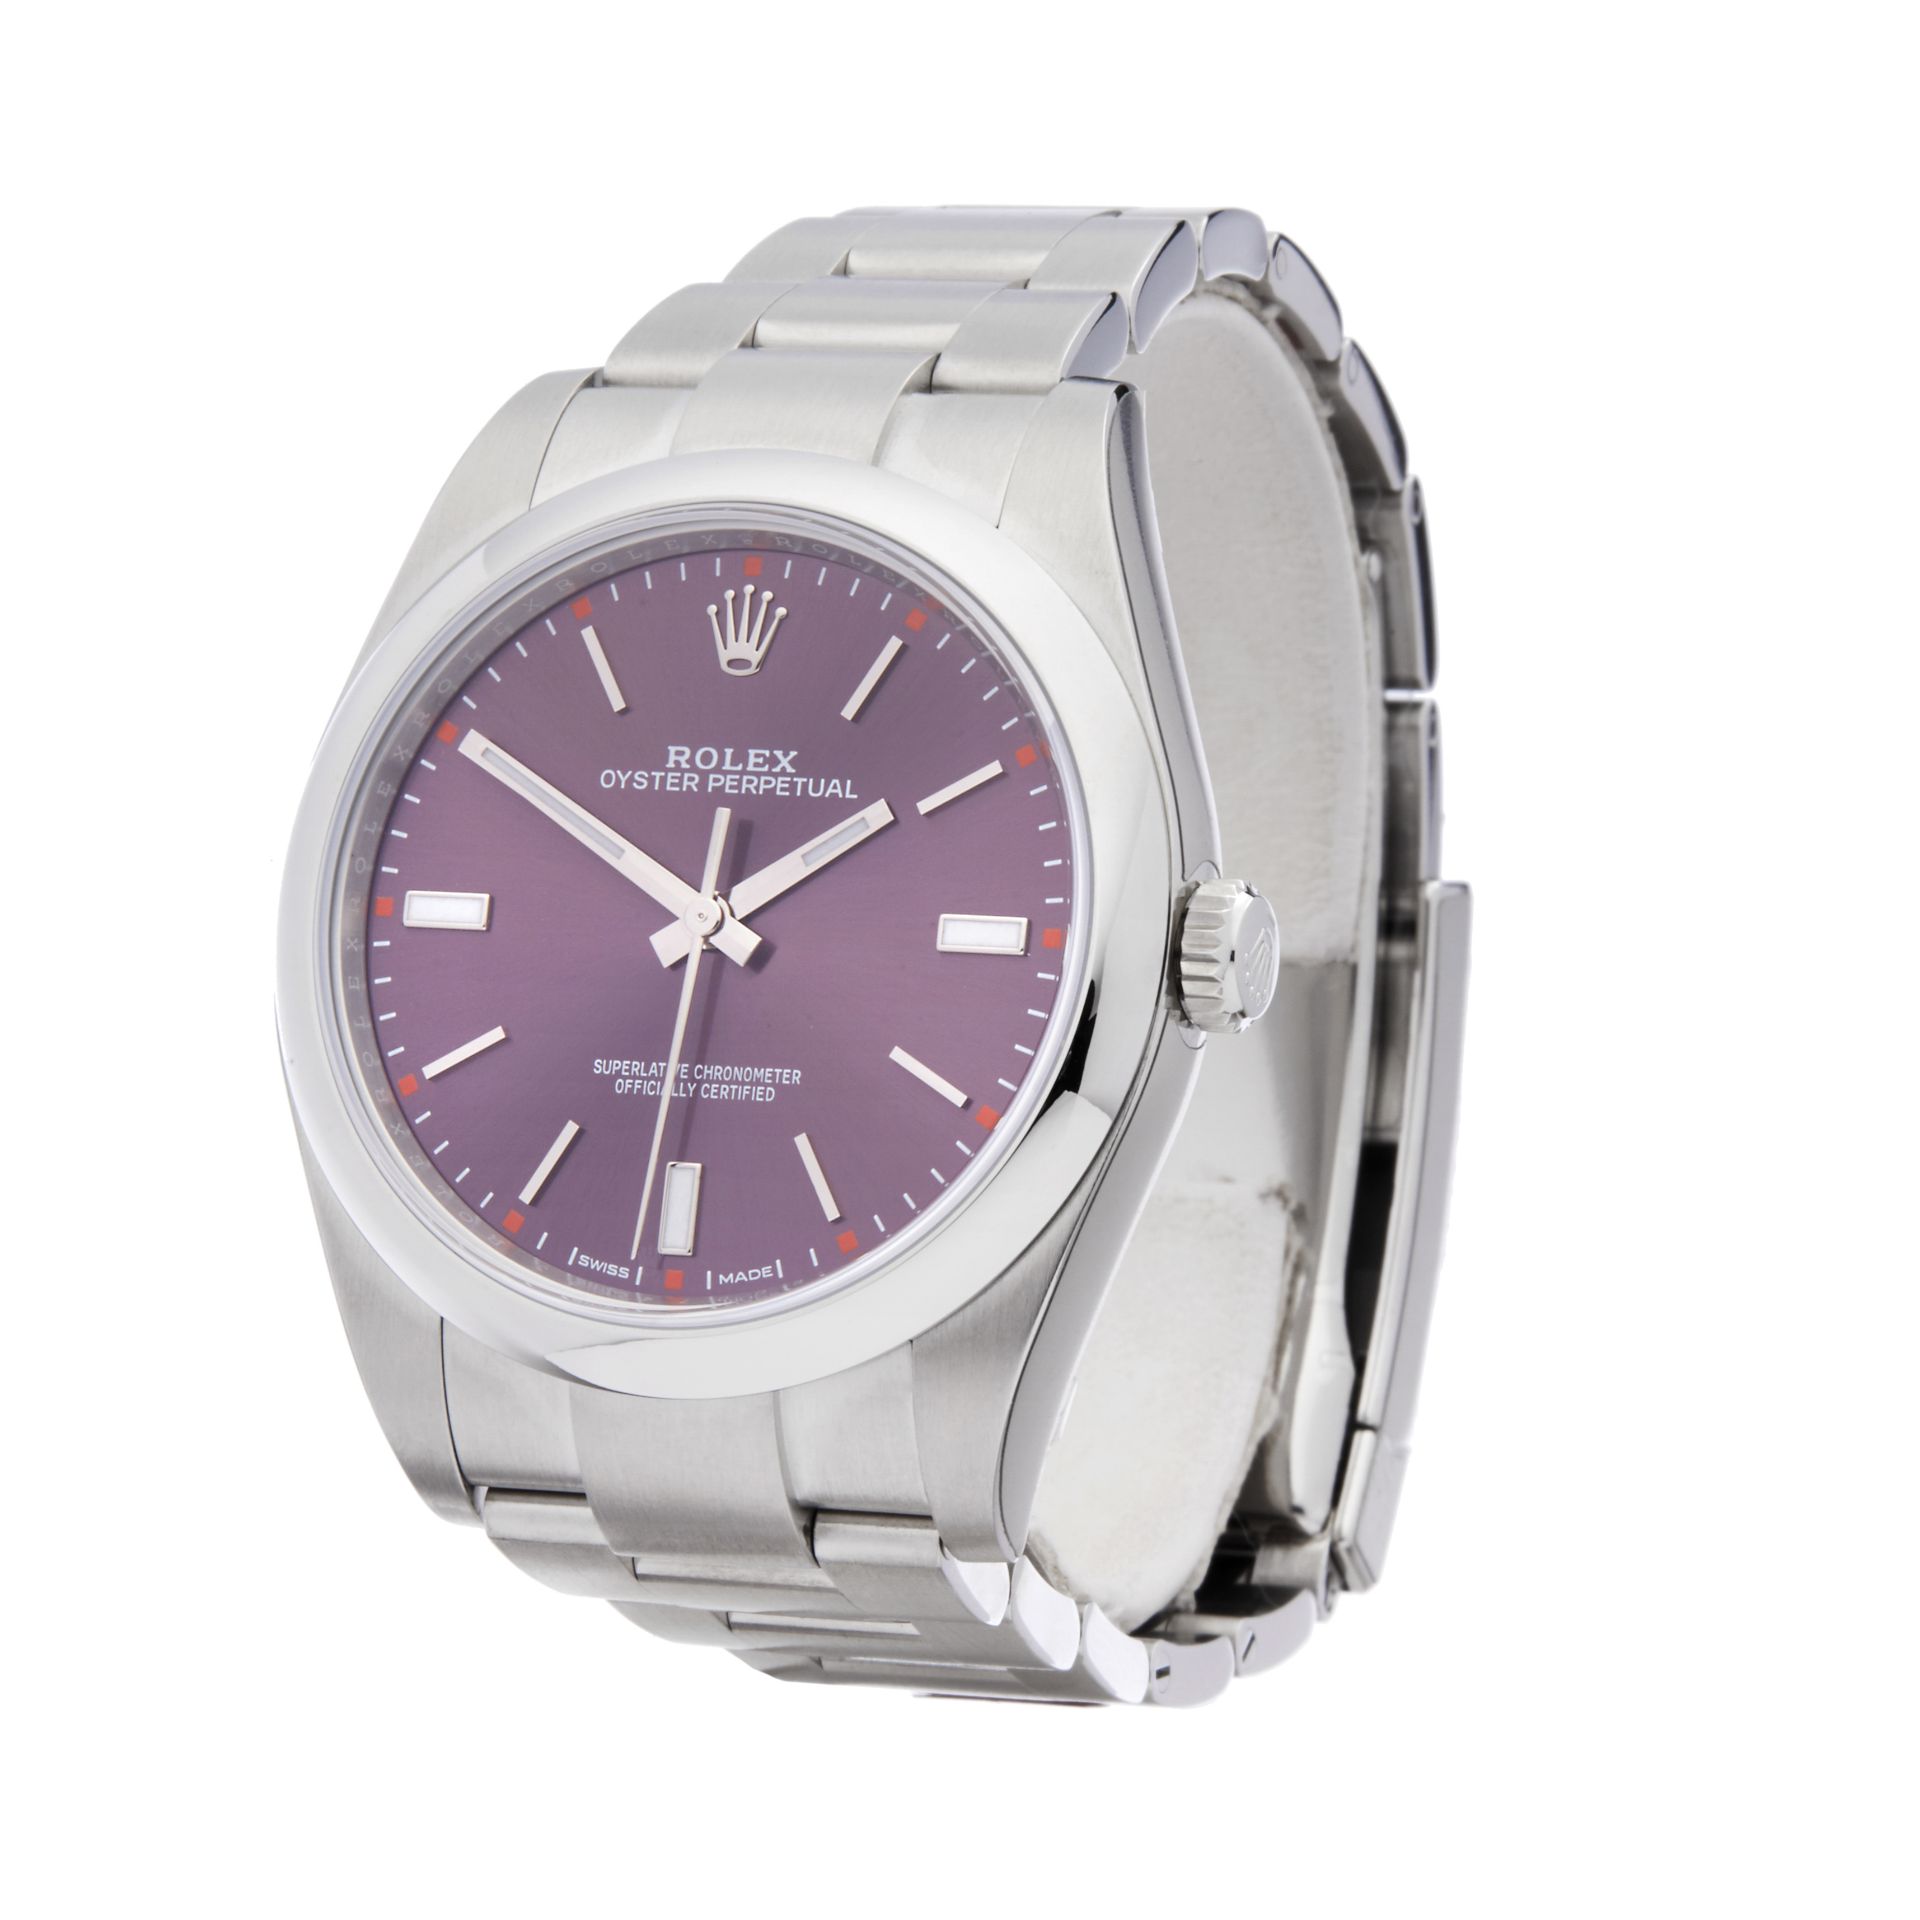 Rolex Oyster Perpetual Grape Stainless Steel - 114300 - Image 3 of 7